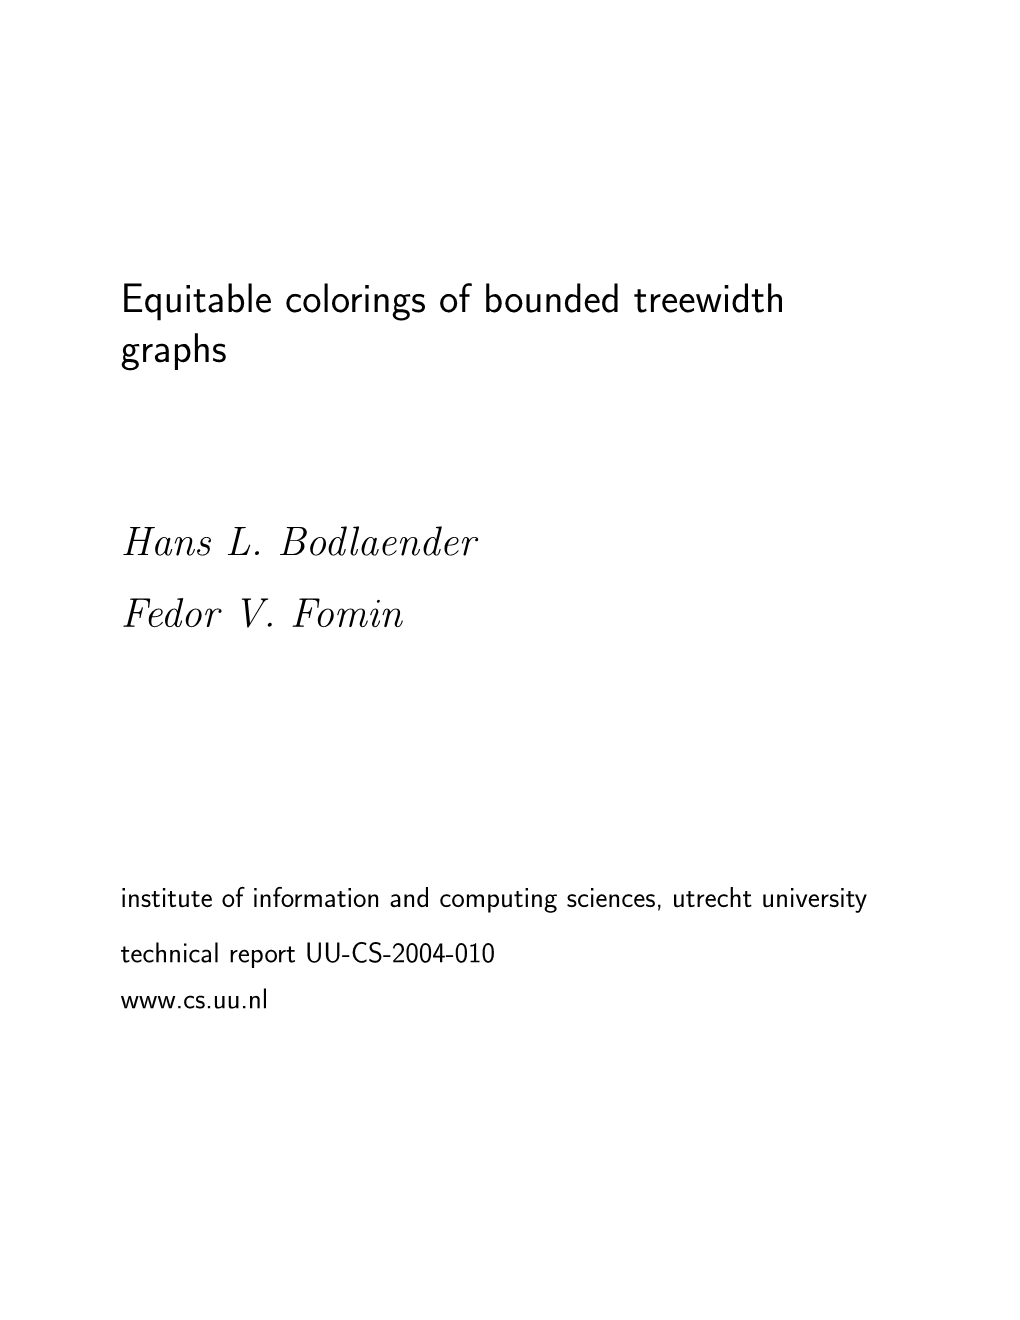 Equitable Colorings of Bounded Treewidth Graphs Hans L